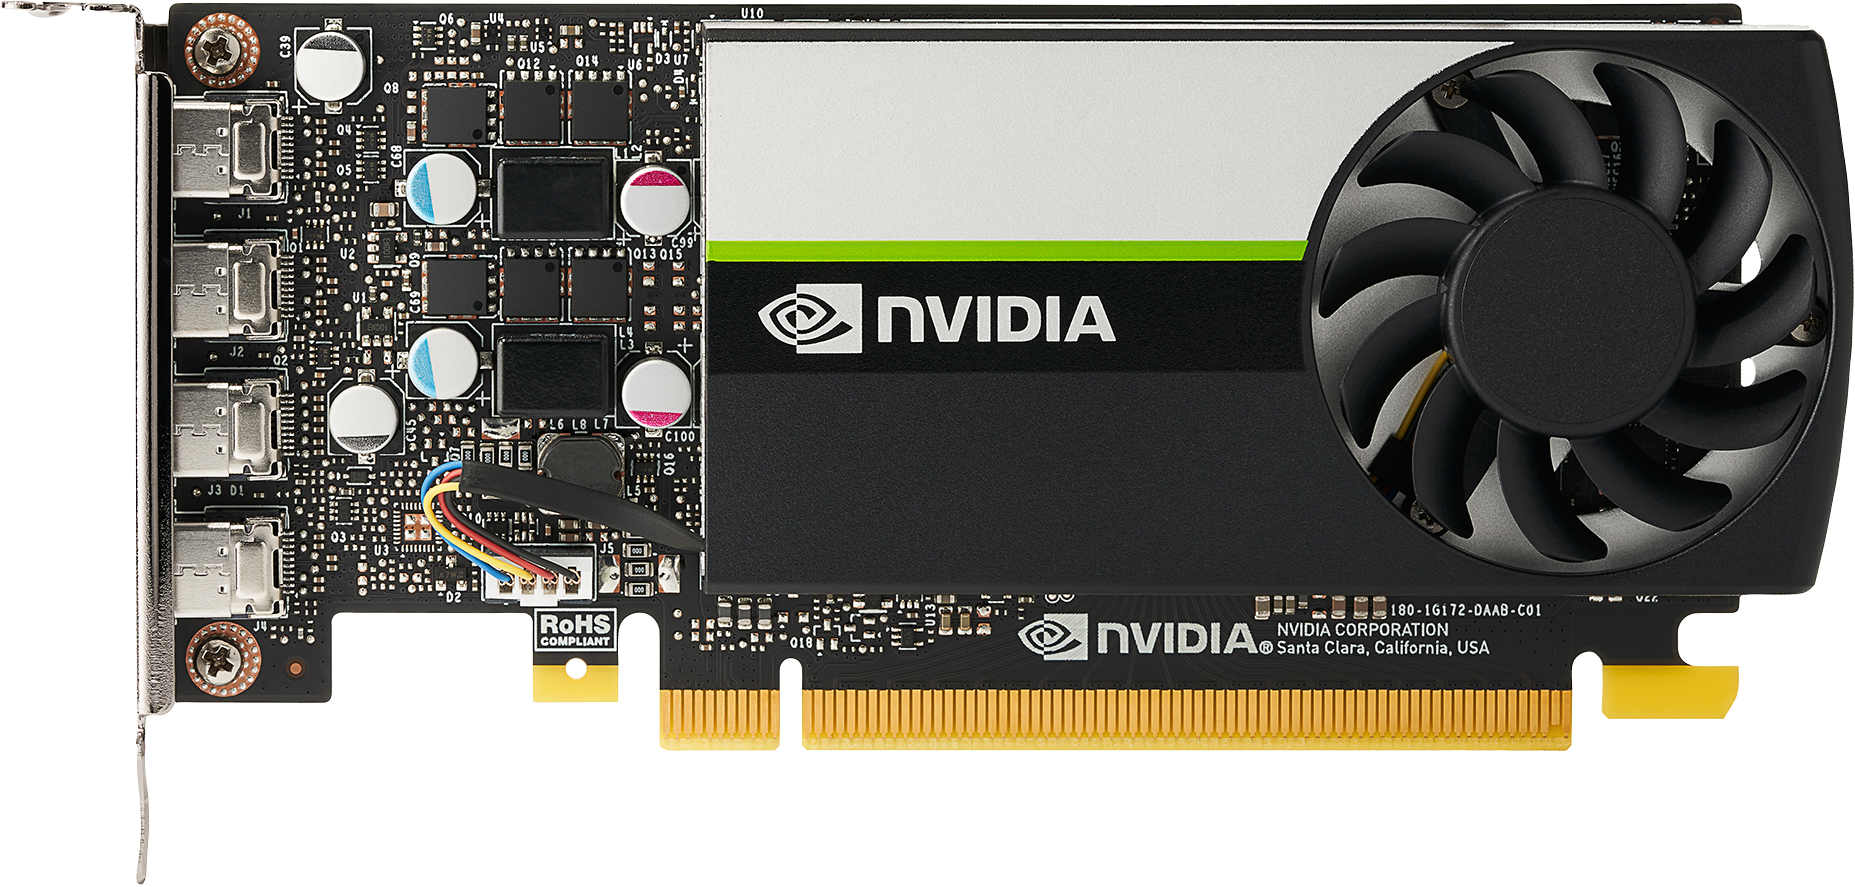  NVIDIA T1000 4GB 4mDP GFX w/2 mDP to DP Adapter